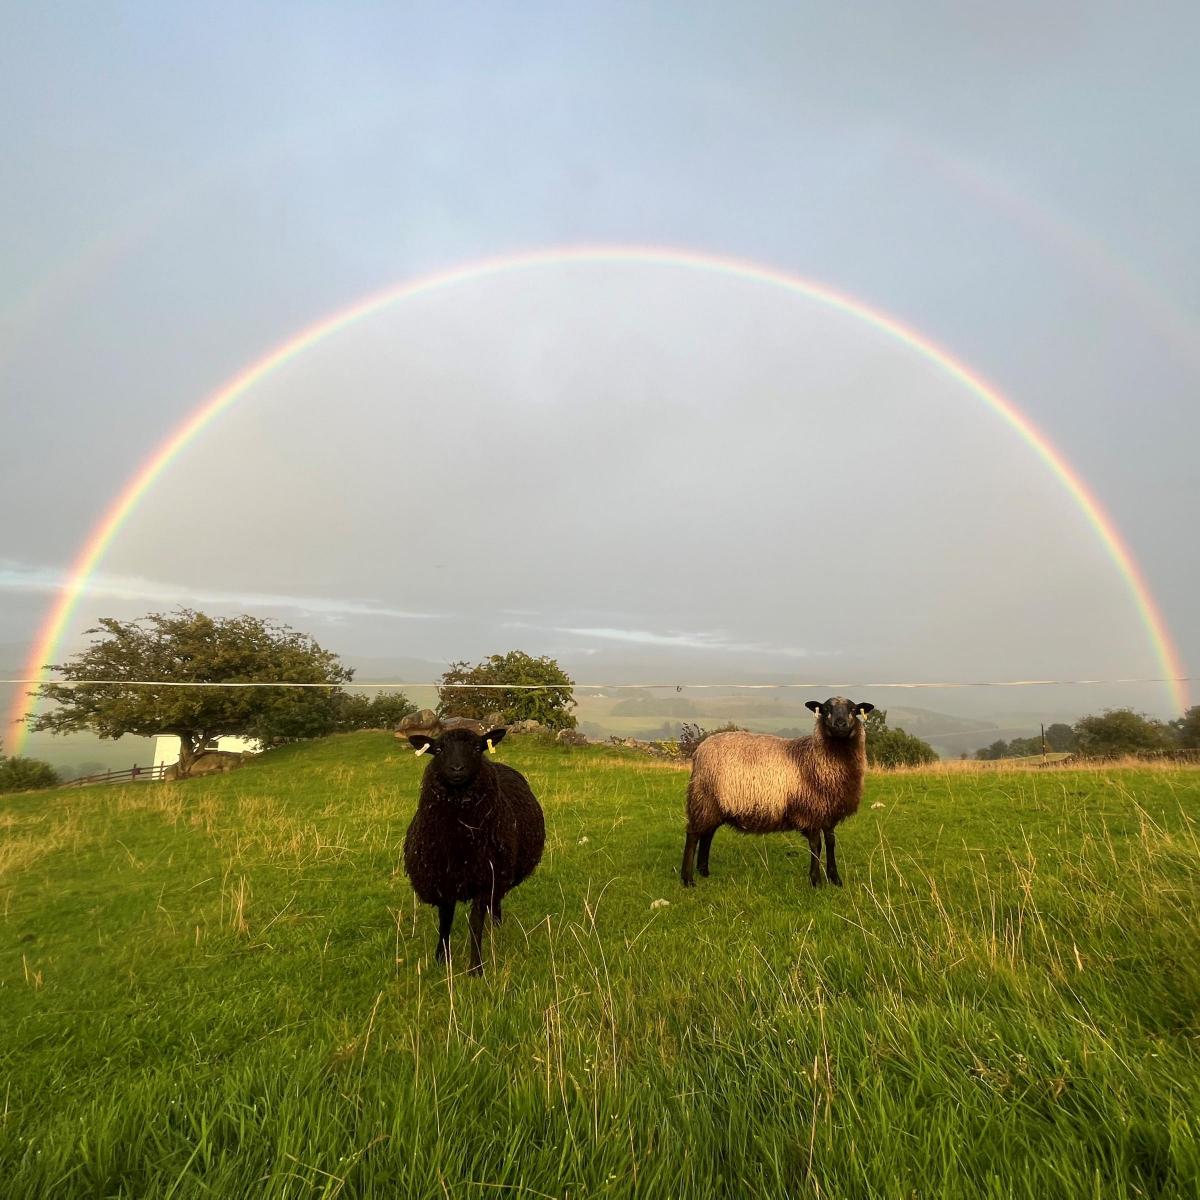 Caitlin Palmer (Newhall Shetland Sheep) - These two Shetland sheep were very willing to pose under this beautiful double rainbow.